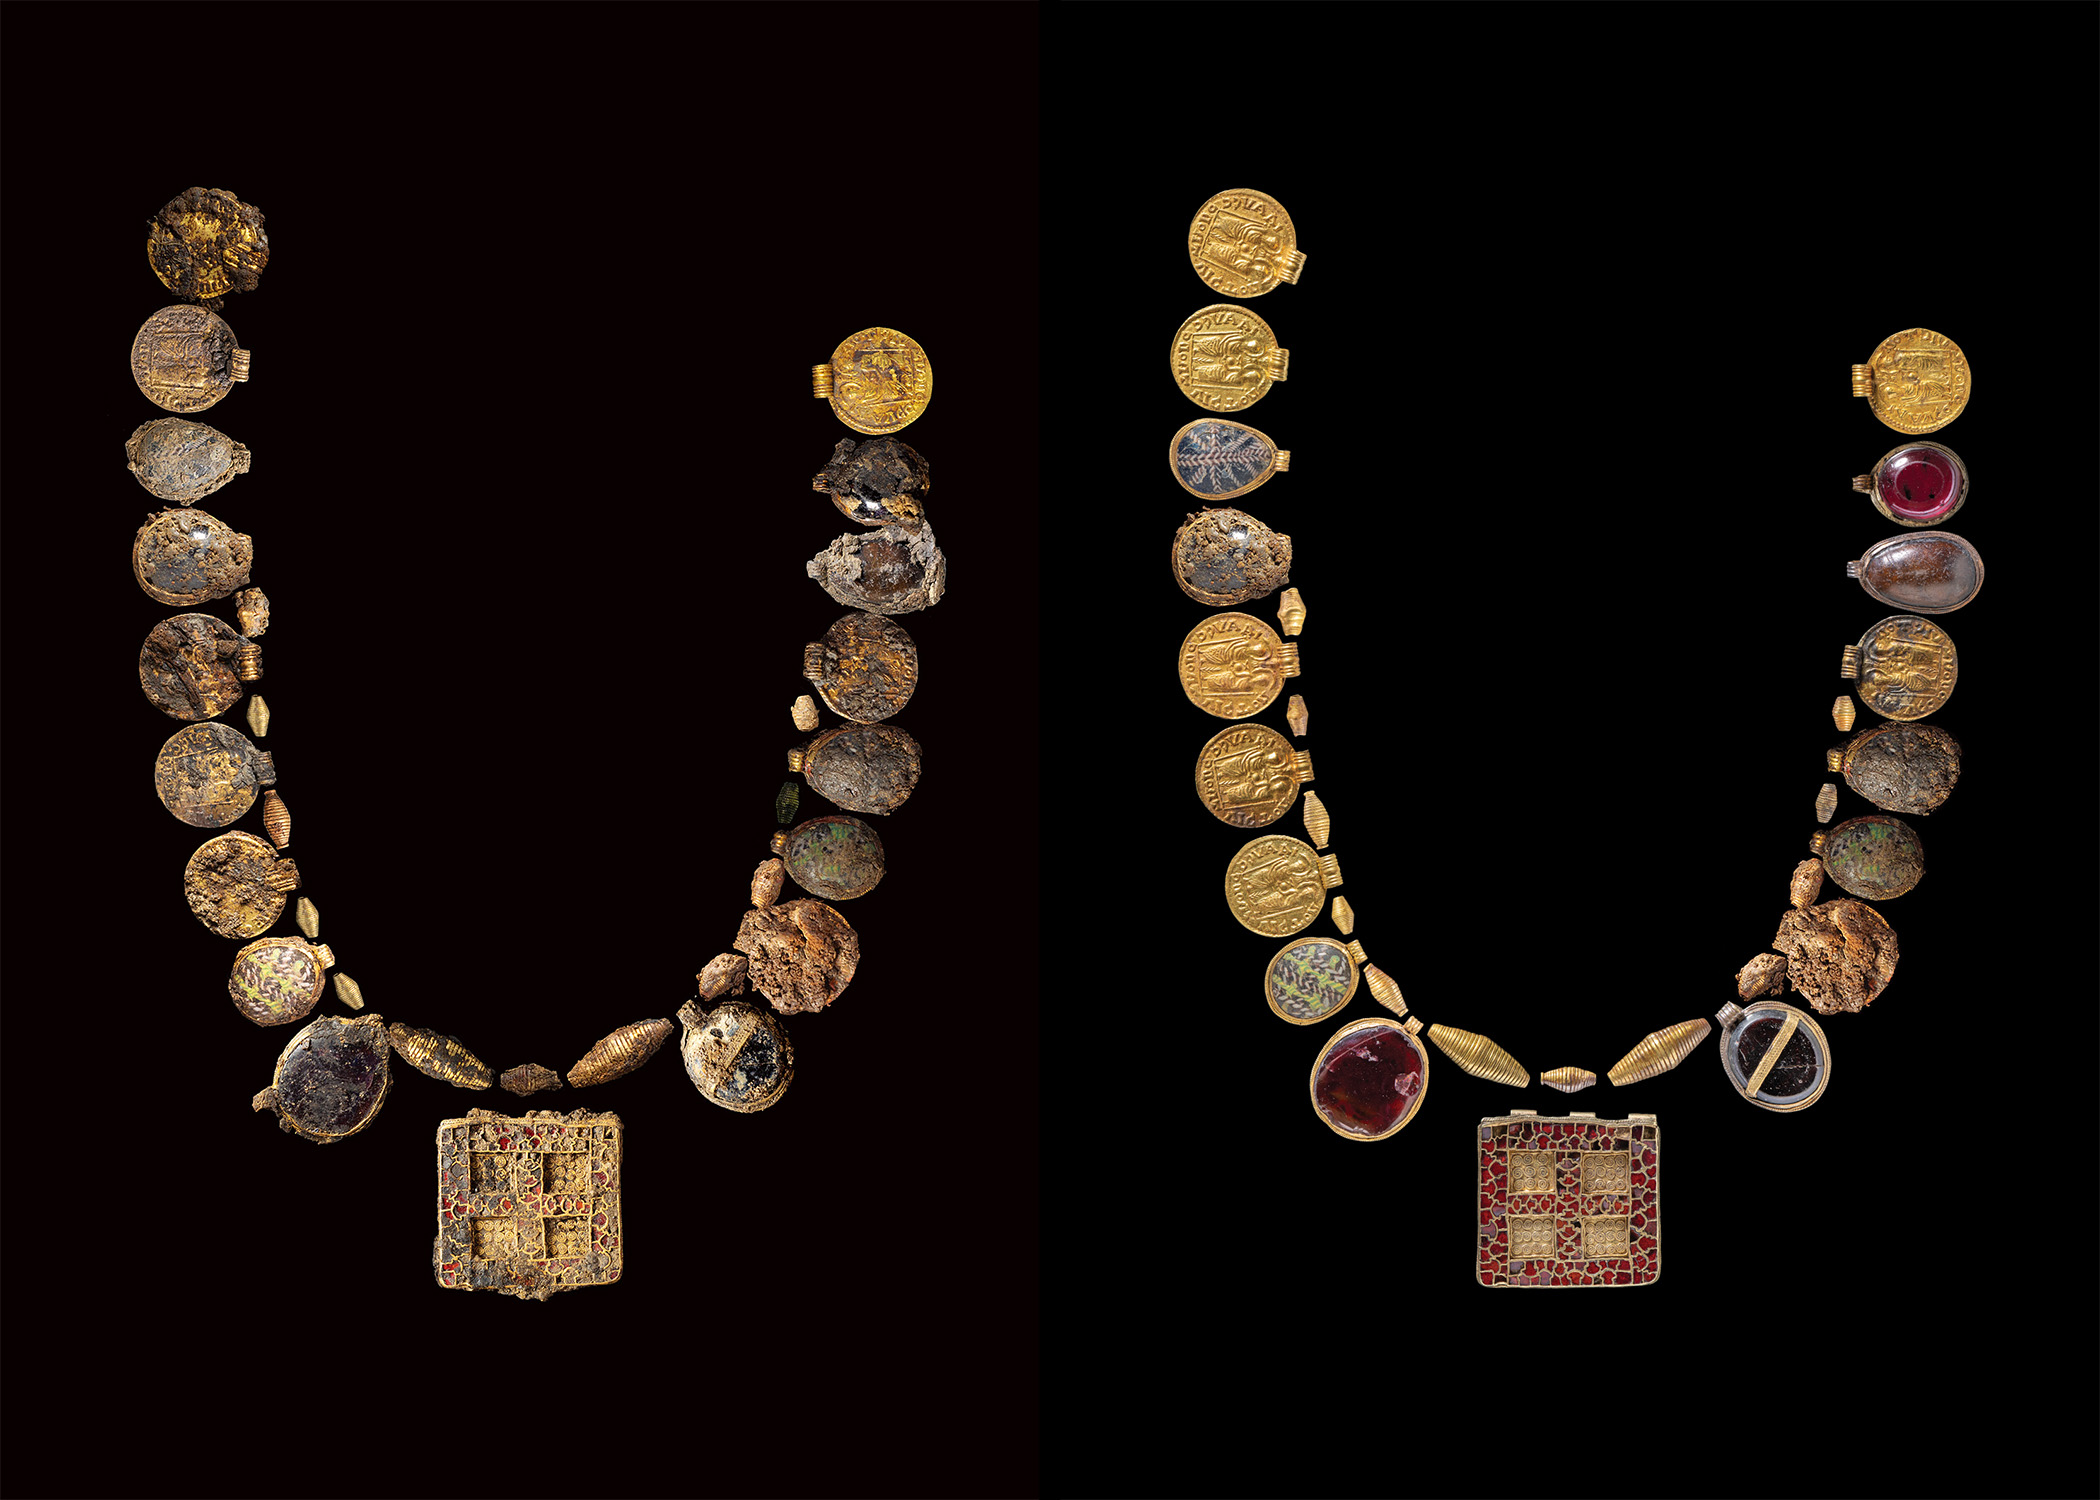 Amazing pectoral and necklace in a seventh-century female tomb